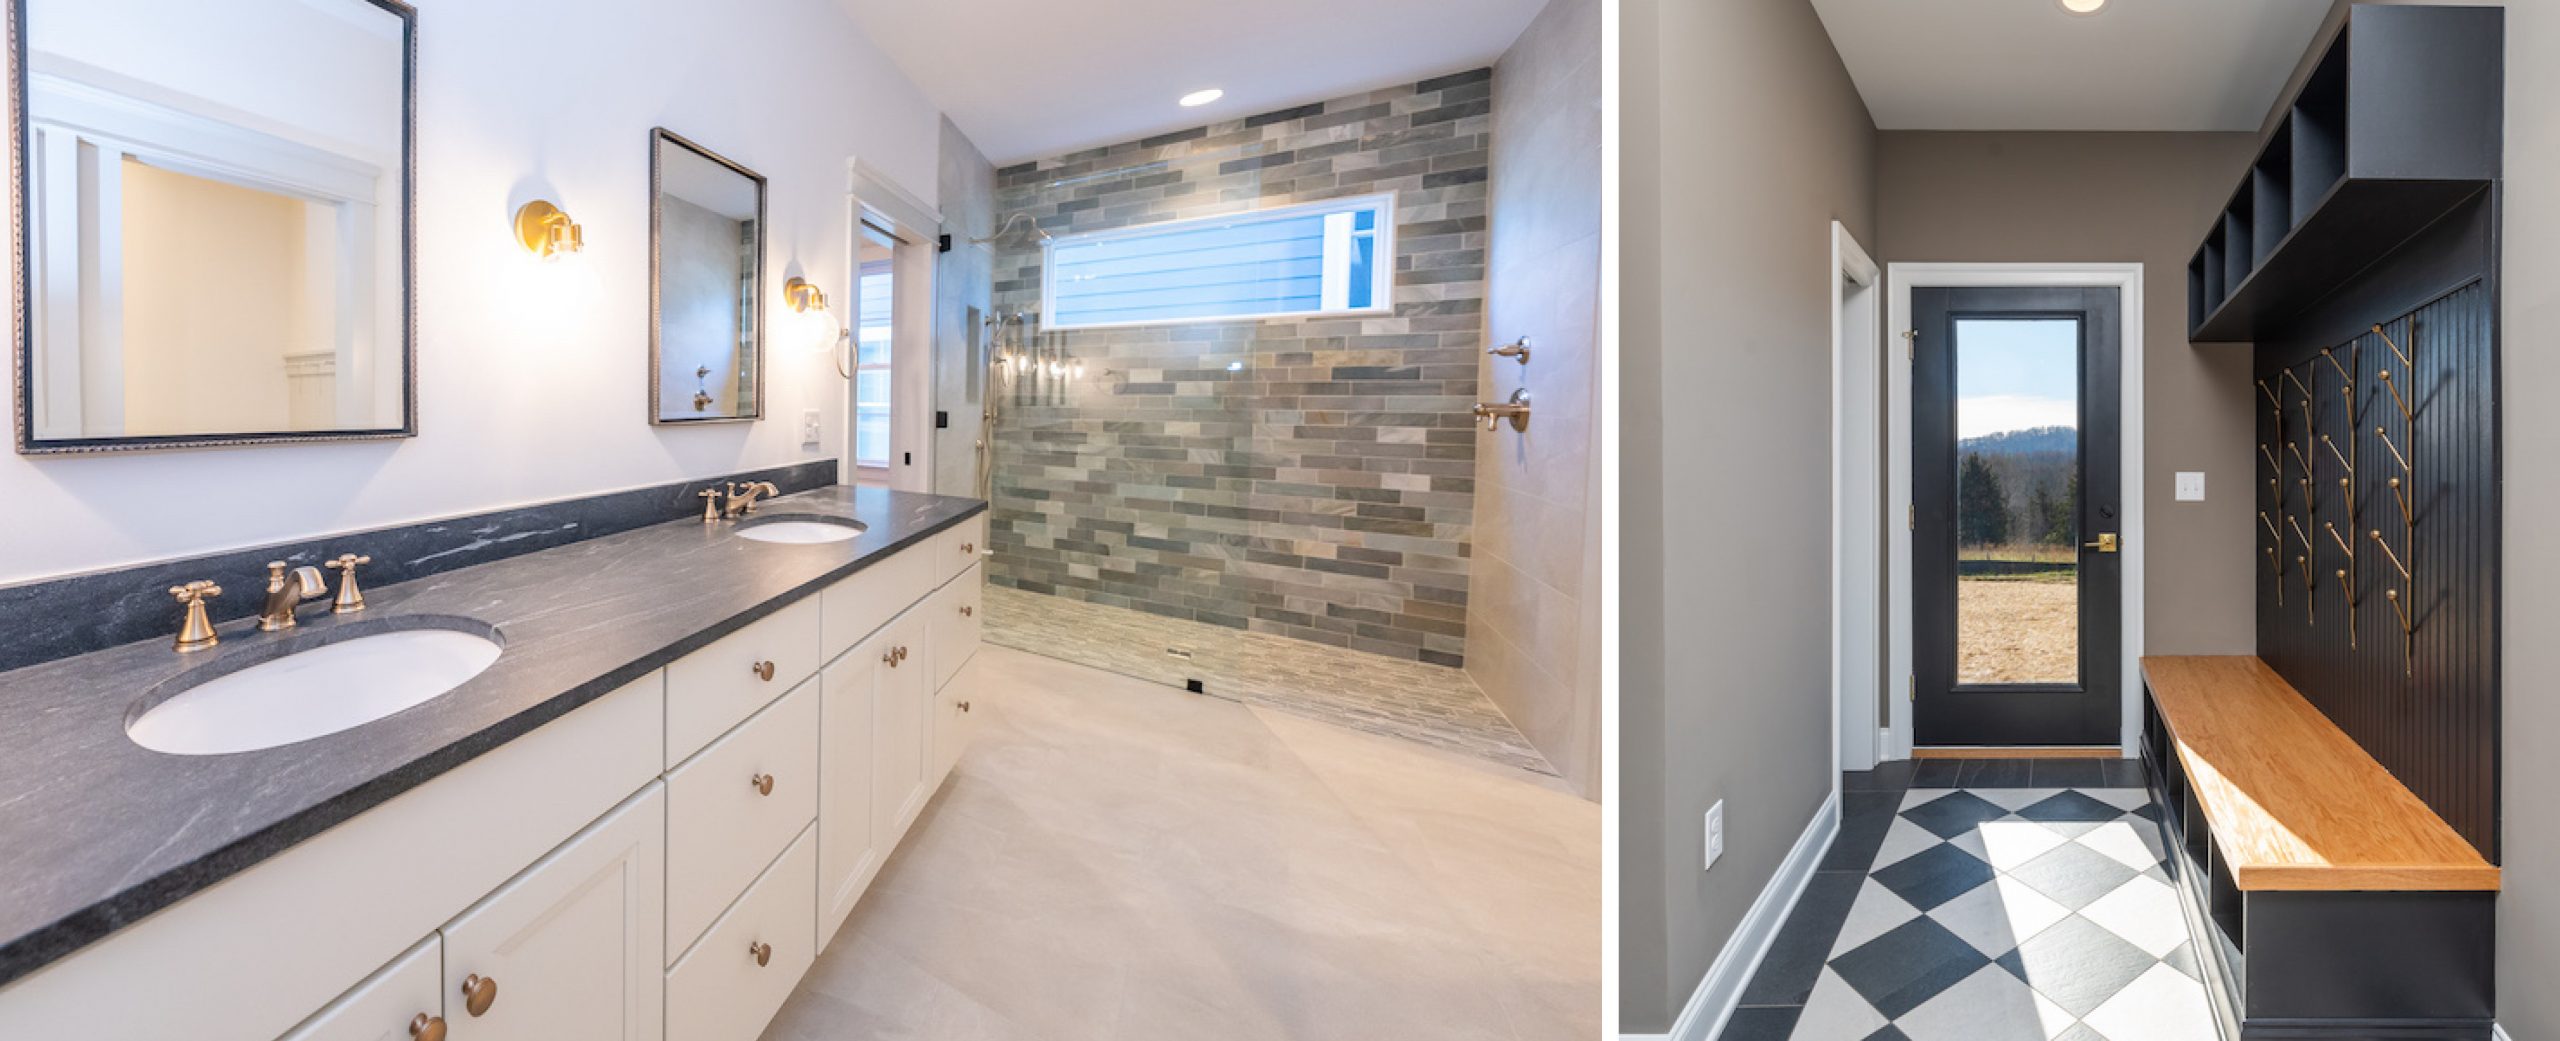 Several kinds of tile in a bath, and a harlequin (or checkered) pattern in a mudroom